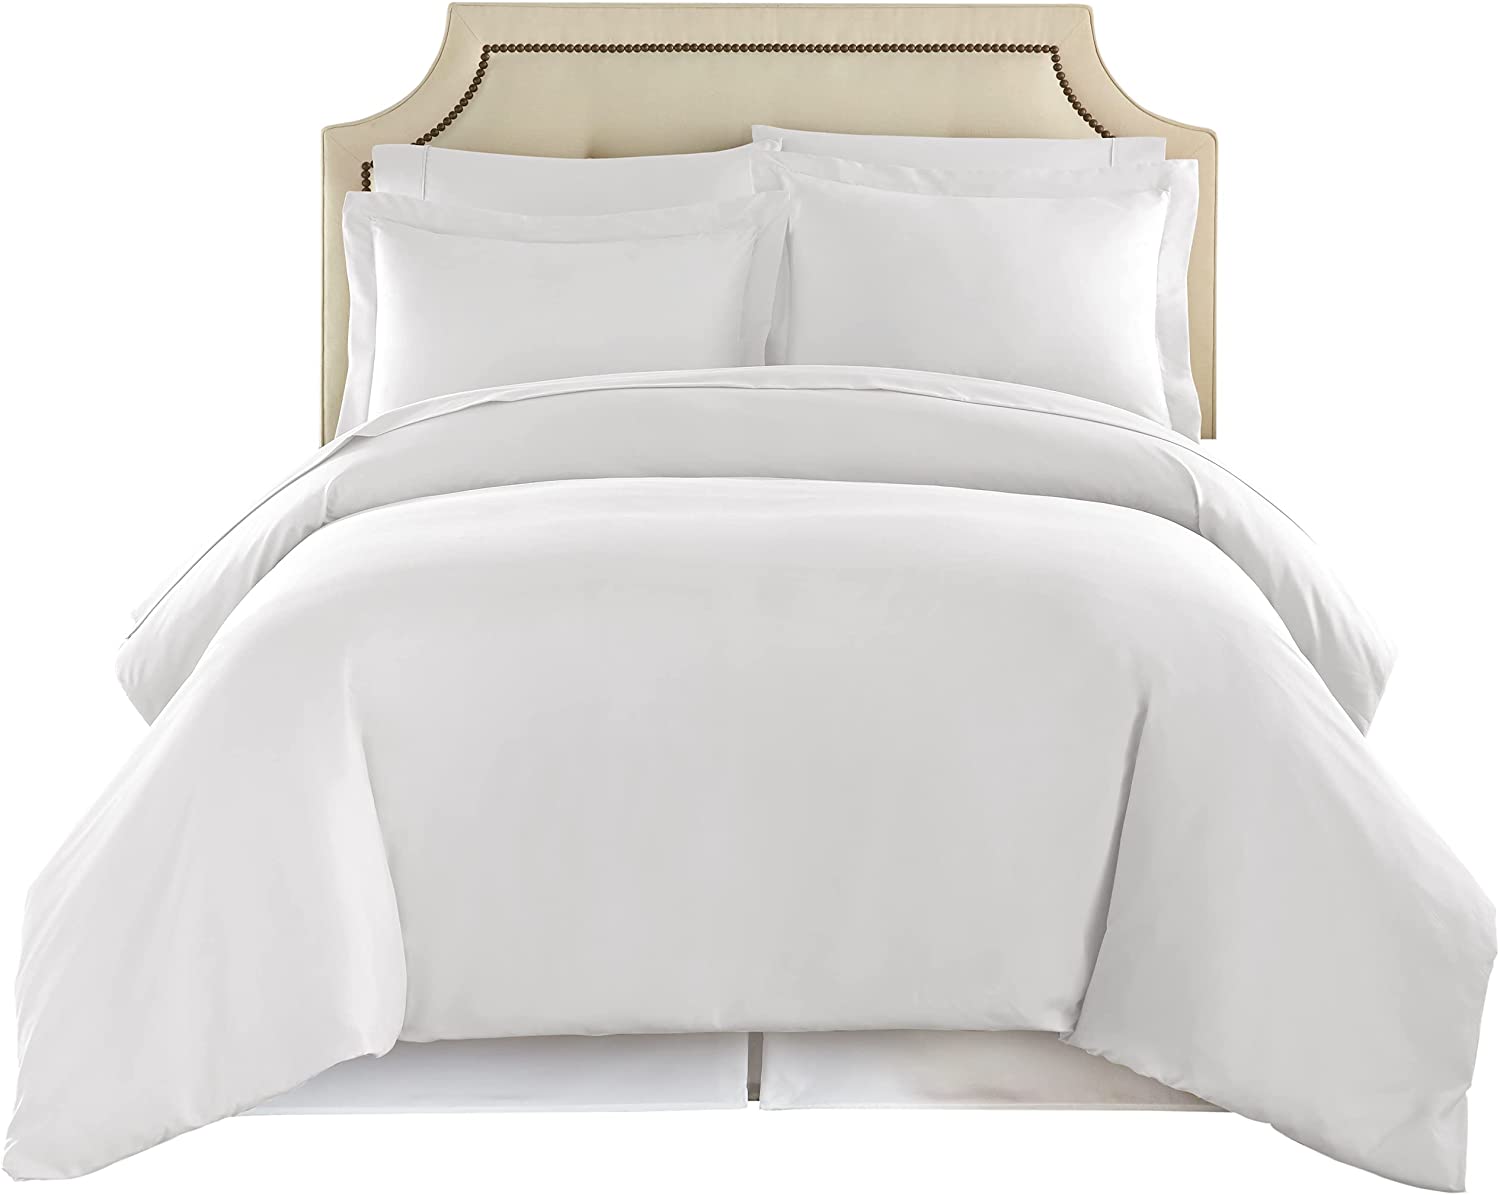 Price:$24.99  COLLECTION Queen Duvet Cover Set - 1500 Thread Lightweight Duvet Covers with Zipper Closure for Comforters w/ 2 Pillow Shams - White : Home & Kitchen